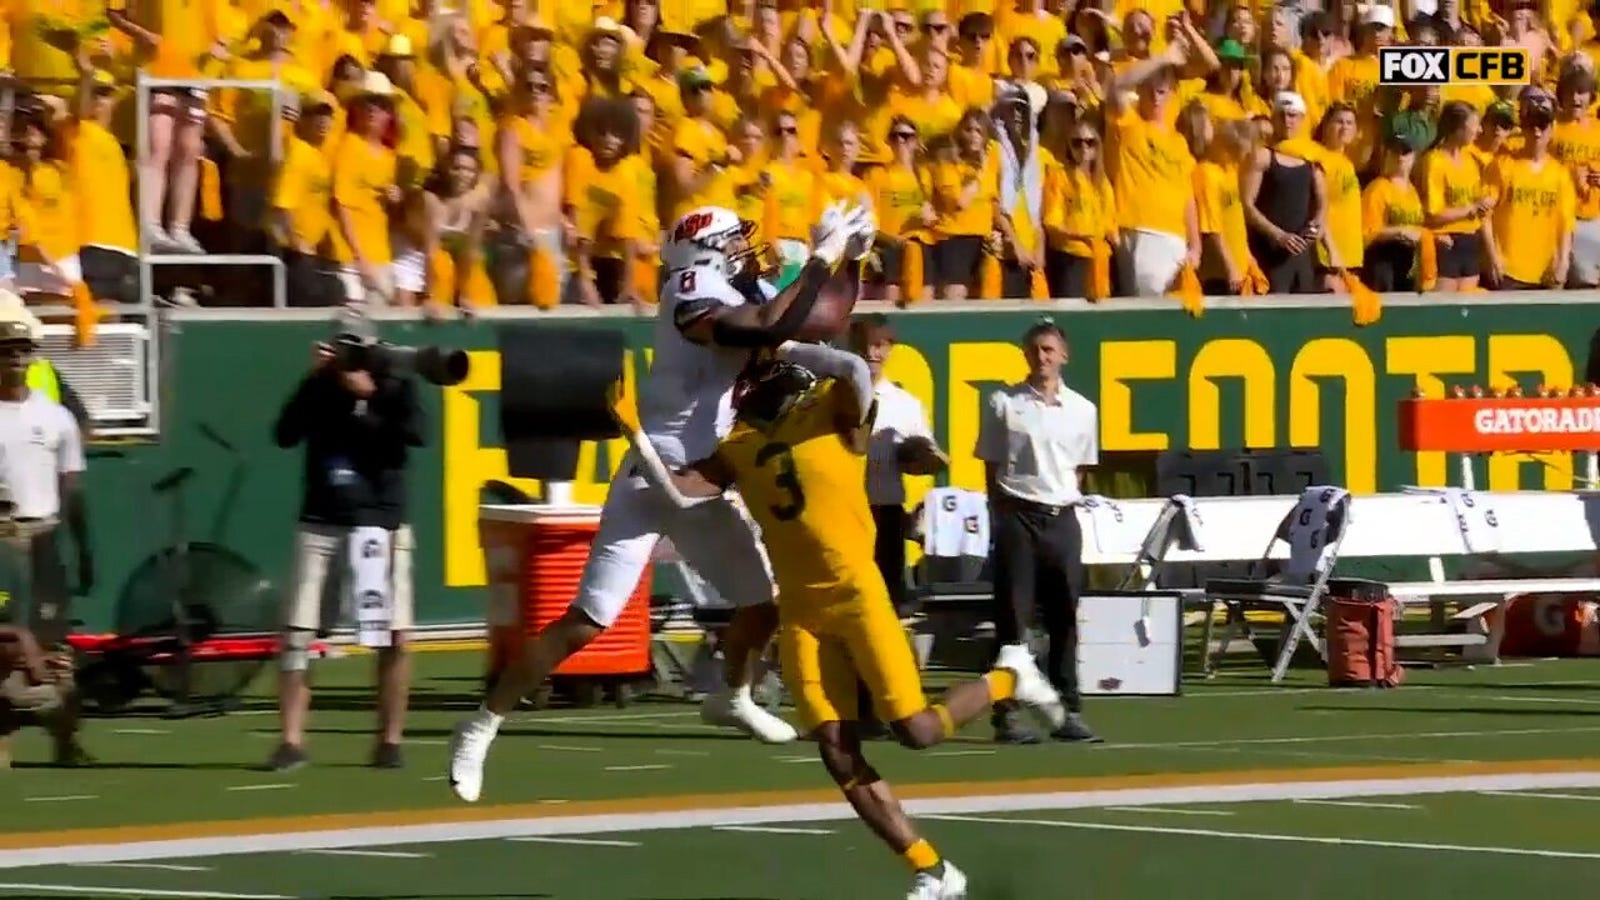 Unreal catch sets up a TD at Oklahoma State vs. Baylor